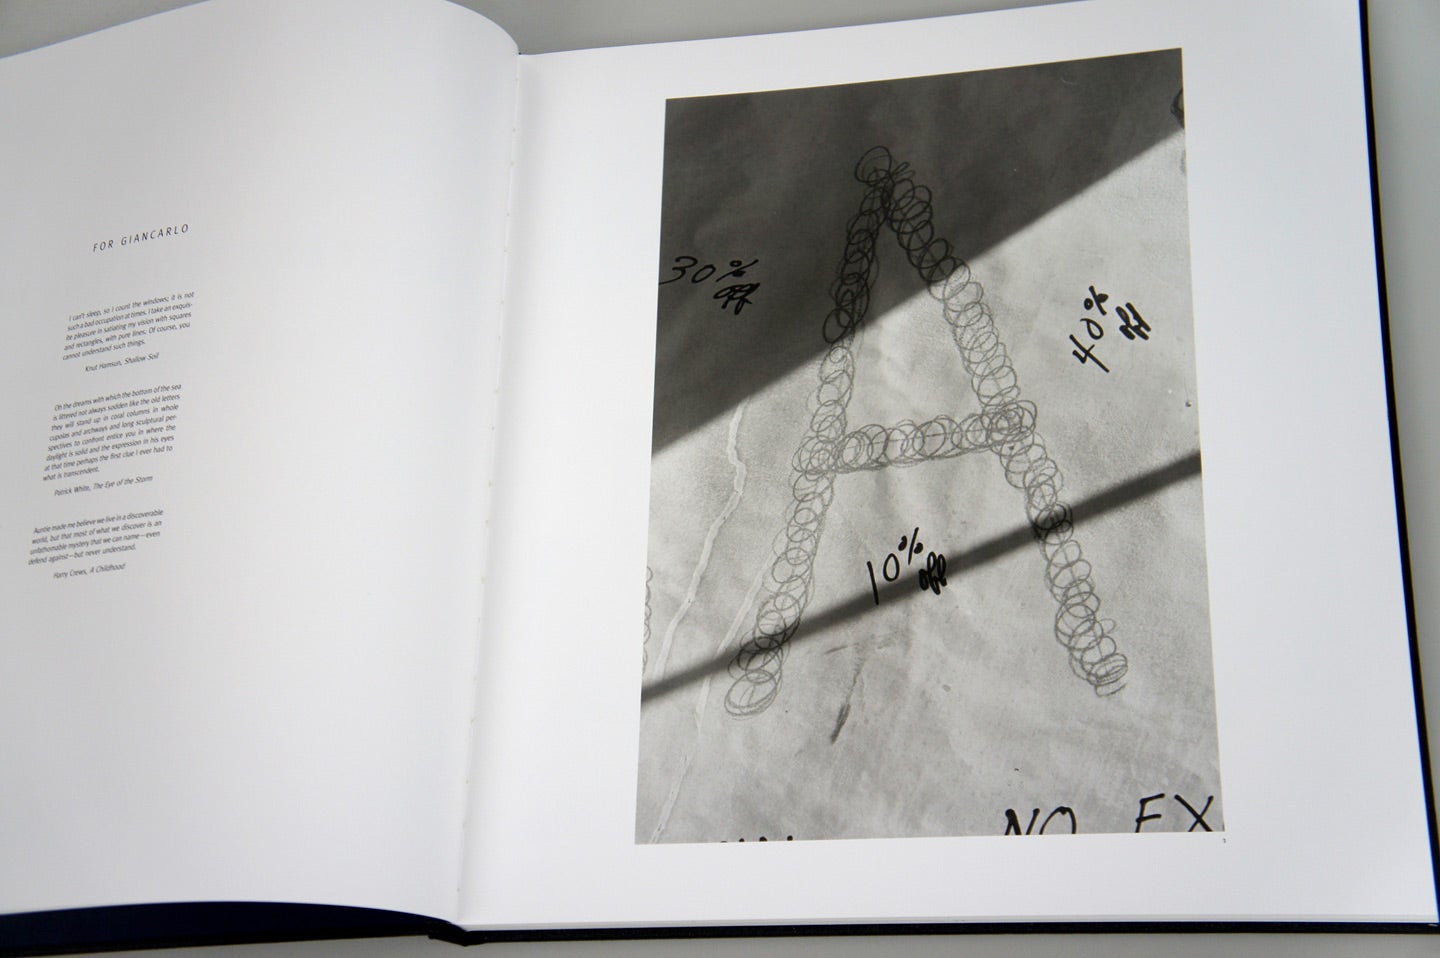 Lee Friedlander: Letters from the People (Special Limited Edition with One Vintage Gelatin Silver Print: "7")